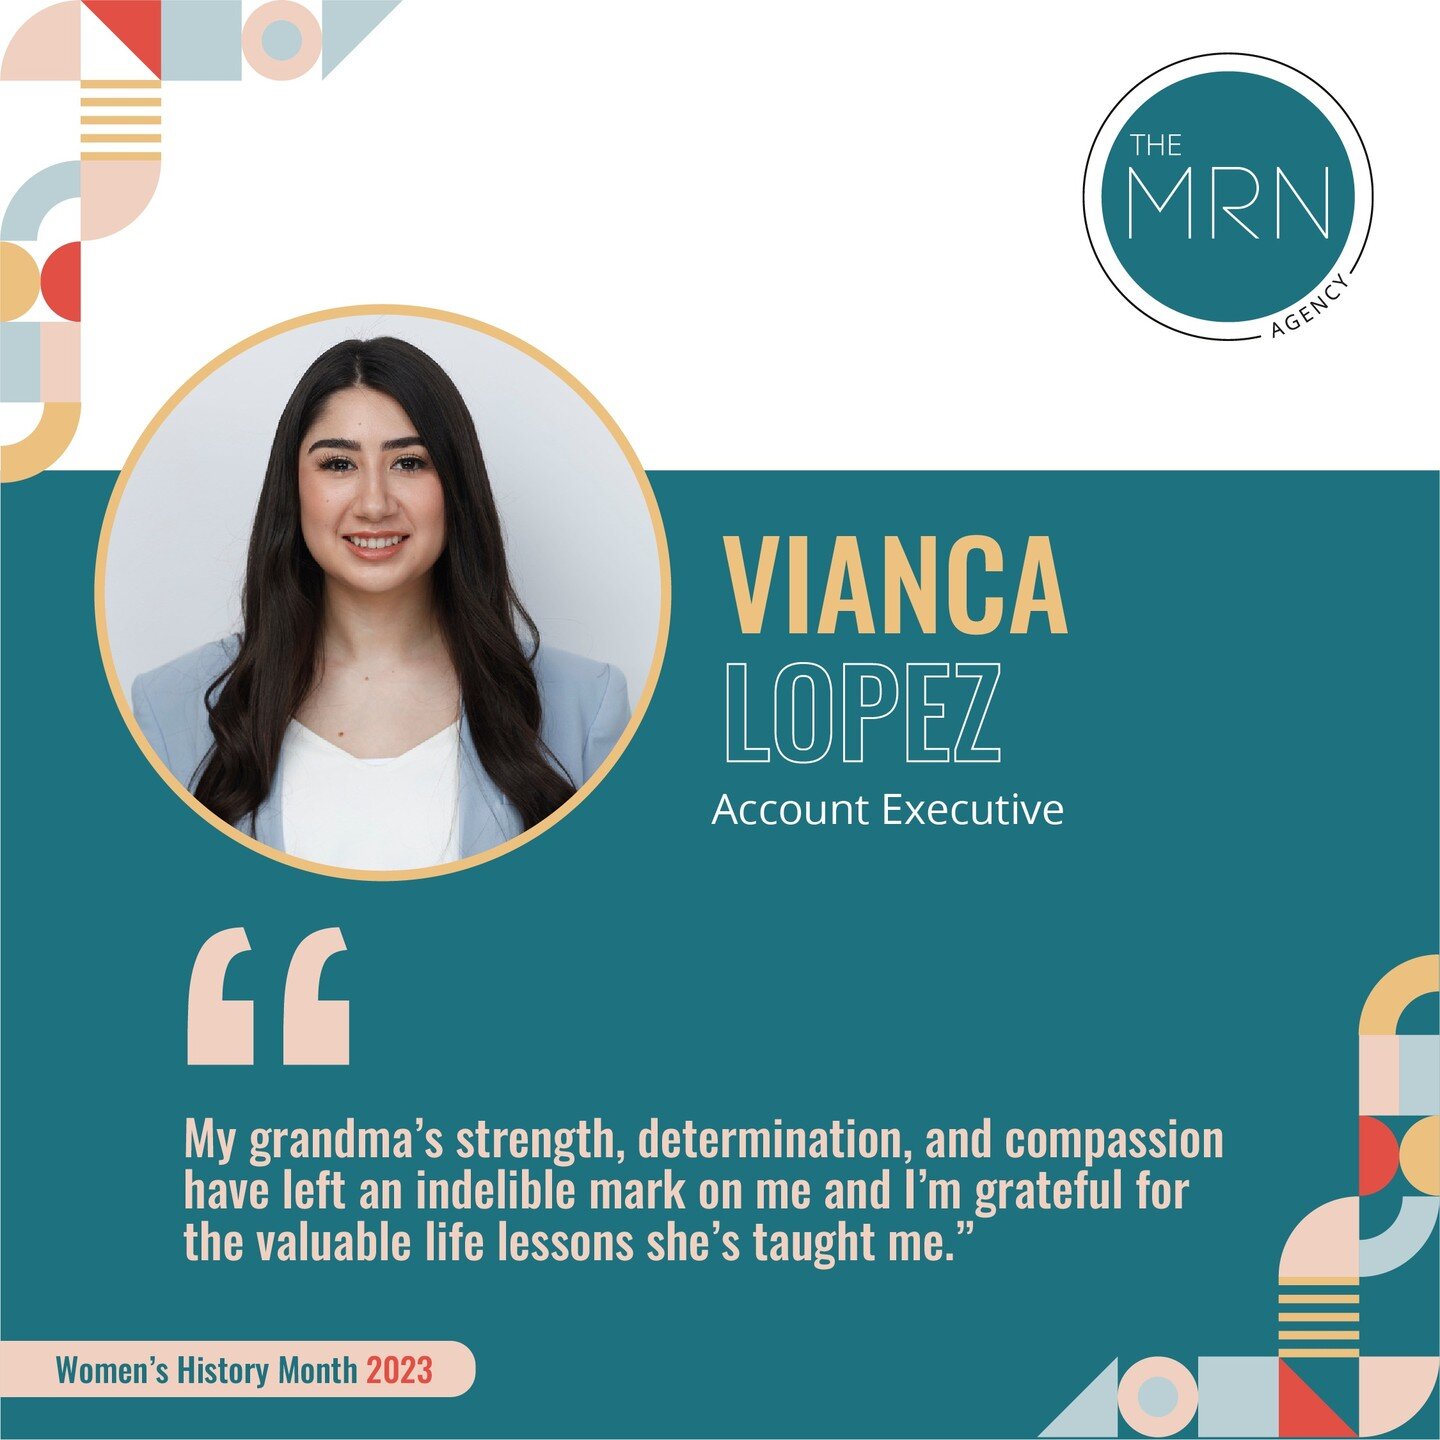 MRN is celebrating Women&rsquo;s History Month by highlighting the women who&rsquo;ve inspired our team!

Vianca Lopez, one of our Account Executives, is inspired by her grandma.

&ldquo;This Women&rsquo;s History Month I am proud to honor the strong